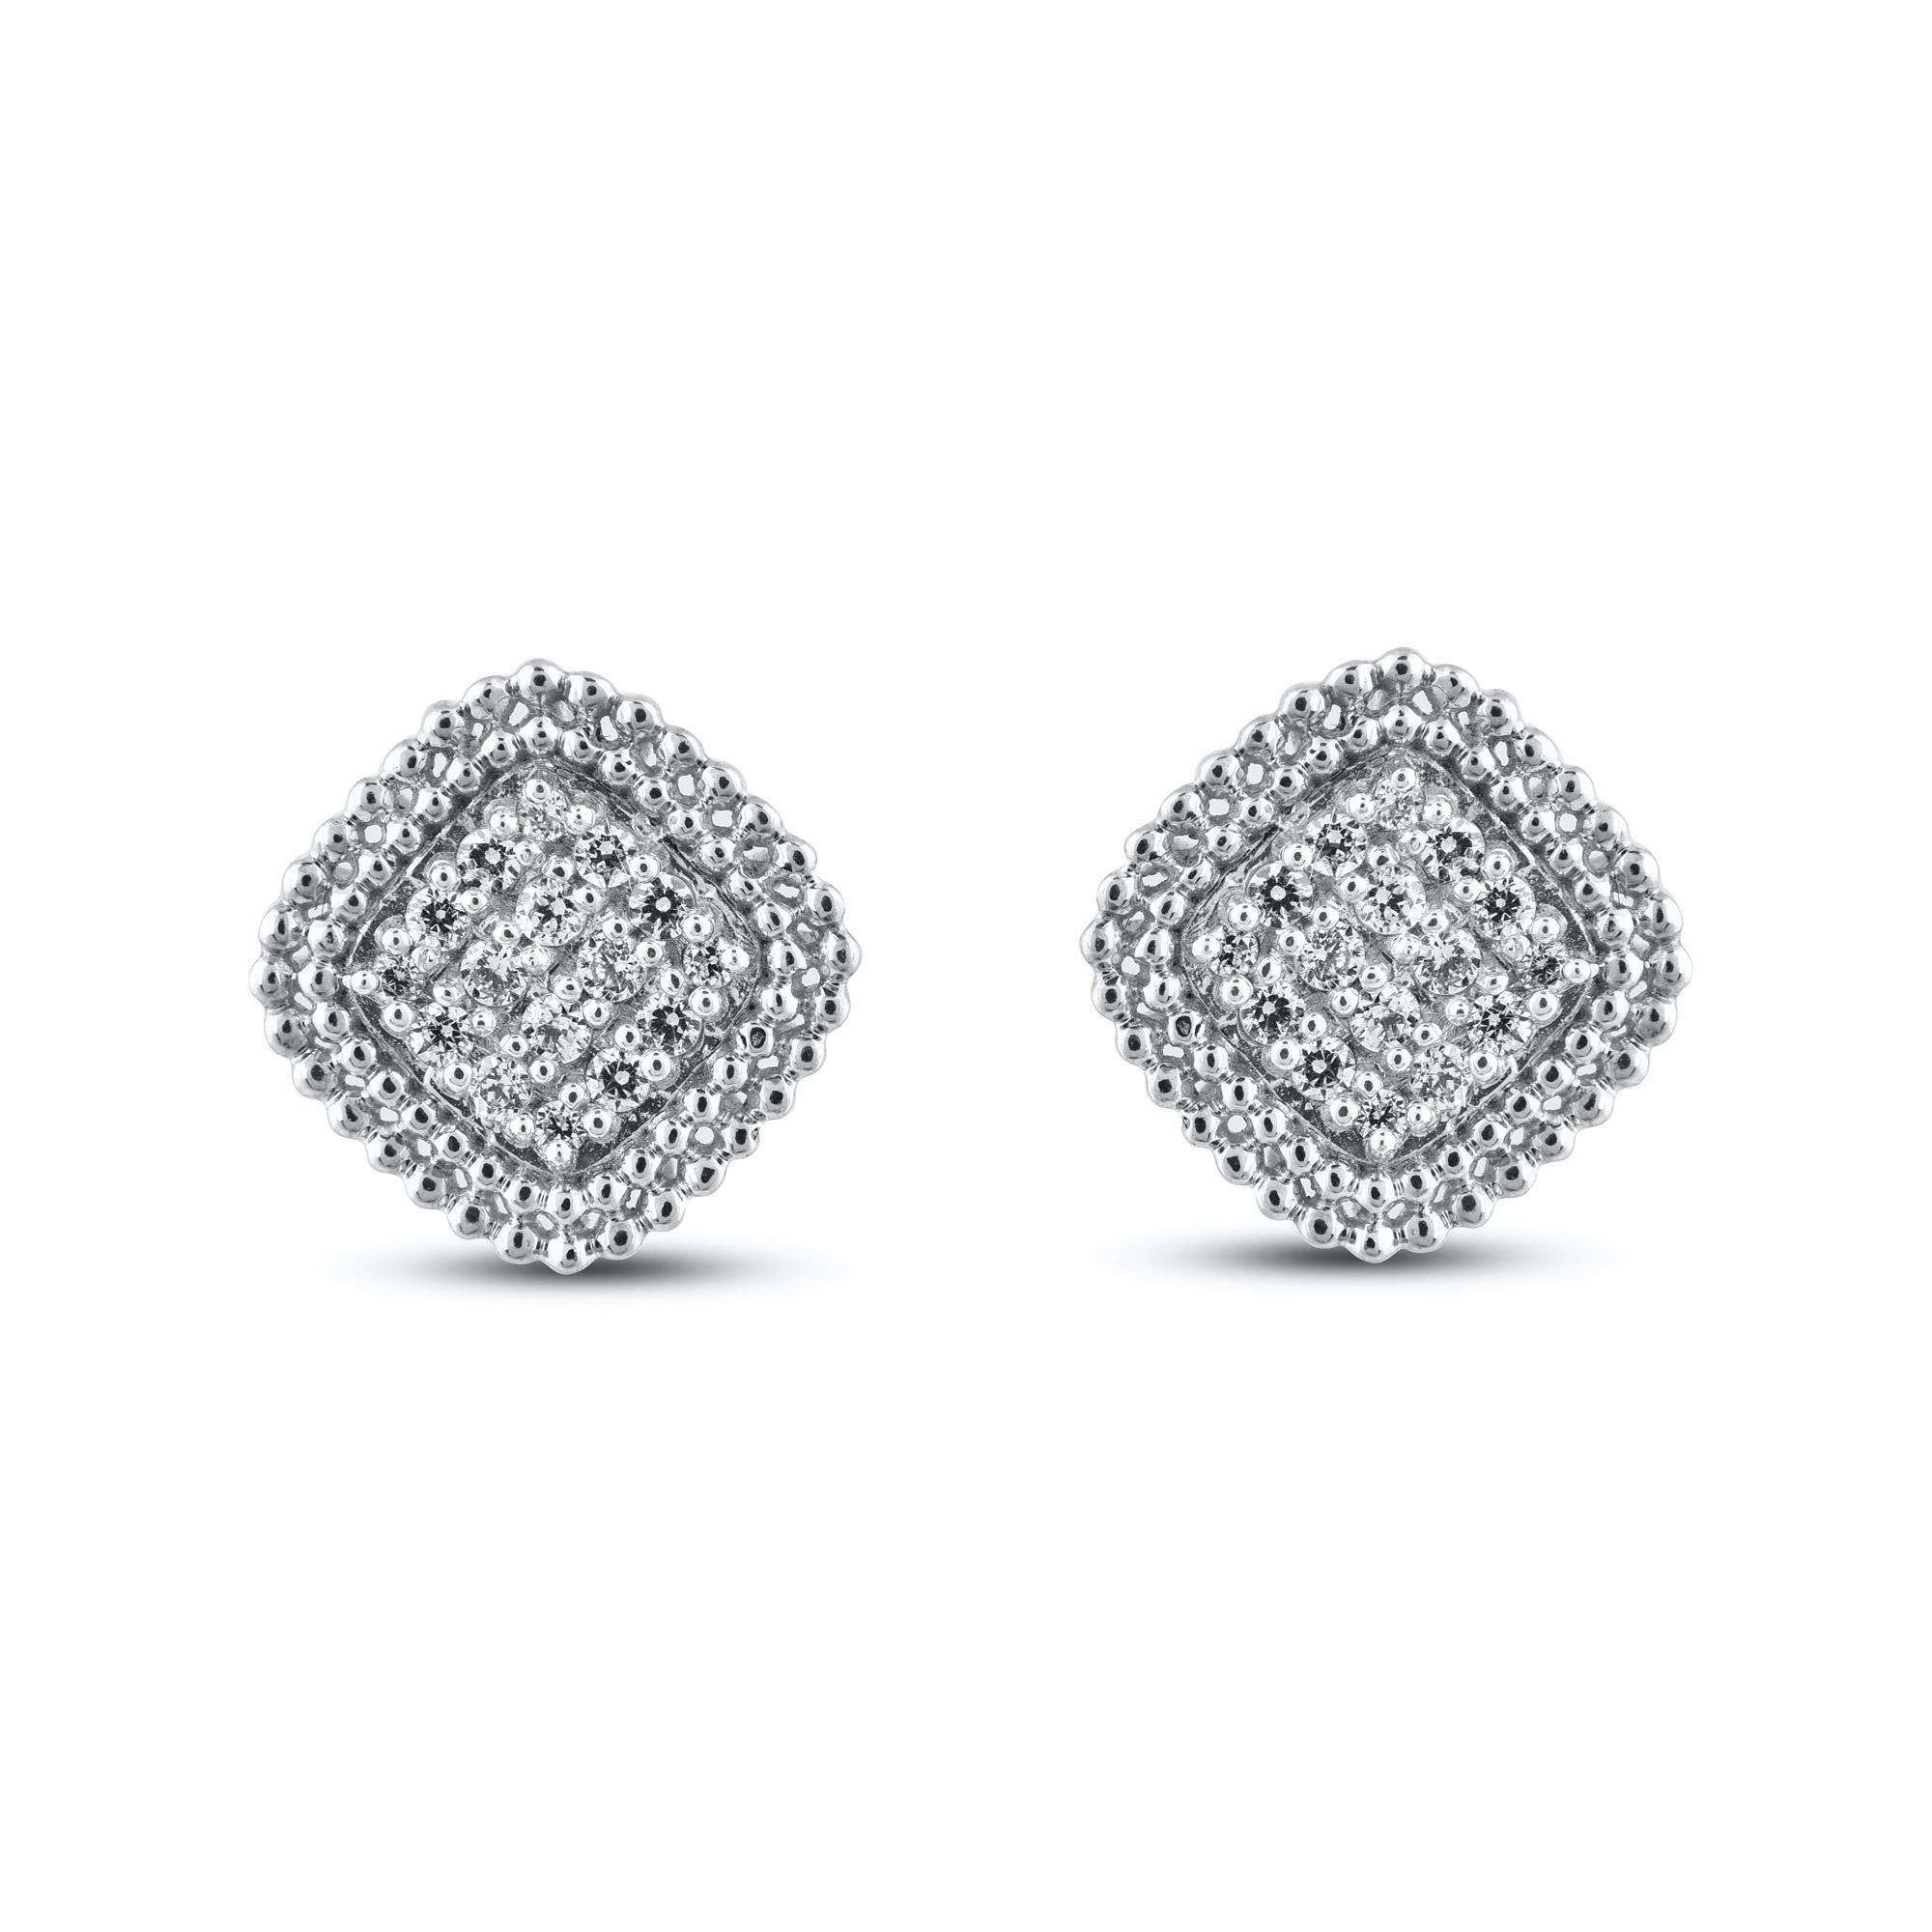 TJD 0.25 Carat Natural Round Diamond 14KT White Gold Halo Stud Earrings For Sale